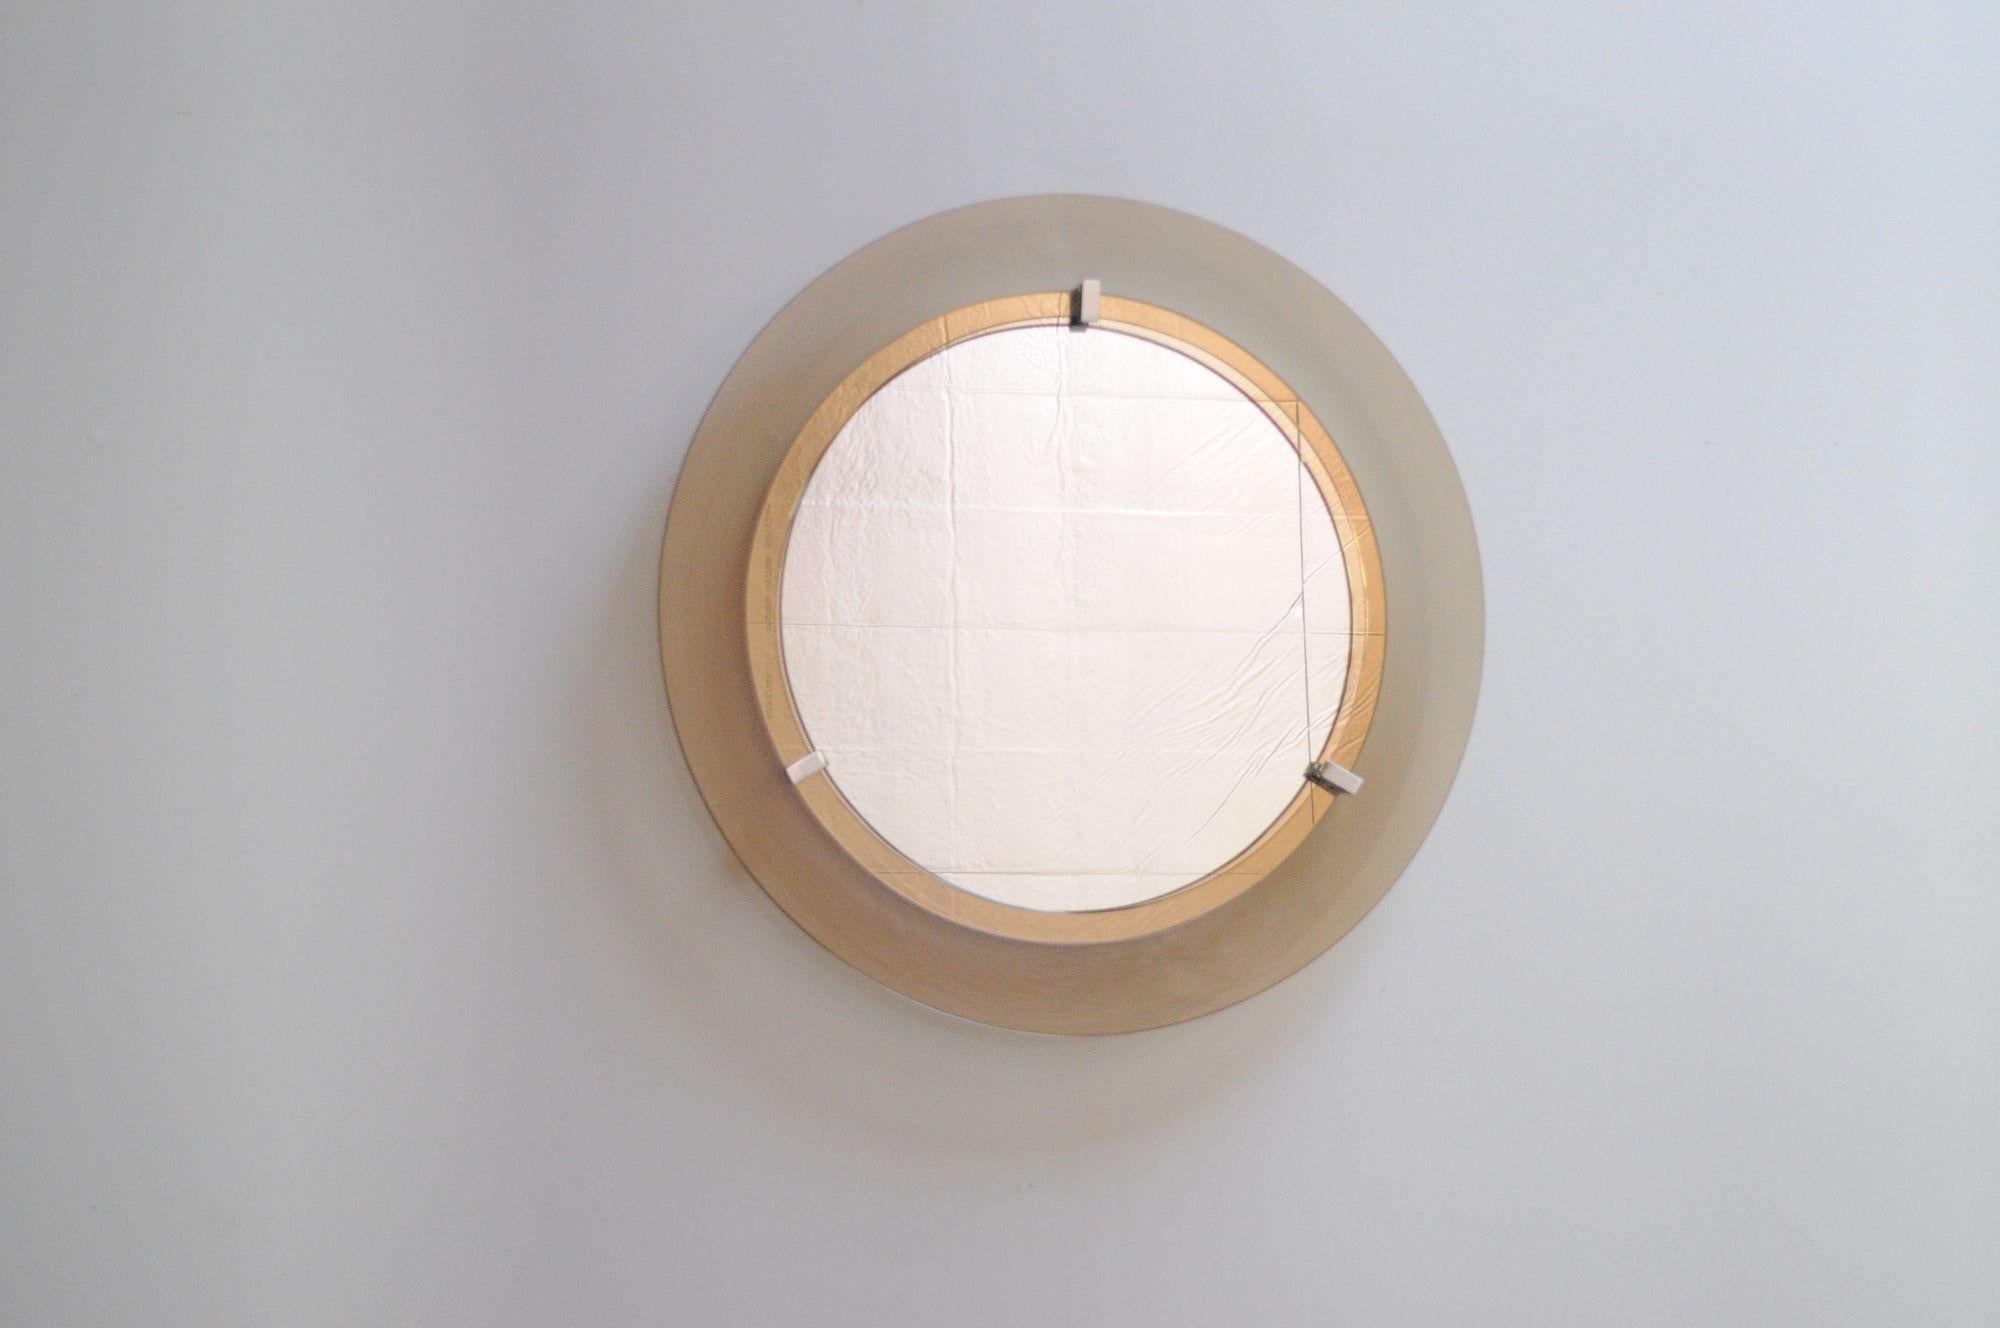 Veca wall mirror composed of deeply inset mirrored glass attached to an enameled metal base and mounted via three chrome brackets to a circular smoked-glass frame (ca. 1960s, Italy).
Very good, vintage condition with only light white enamel loss to